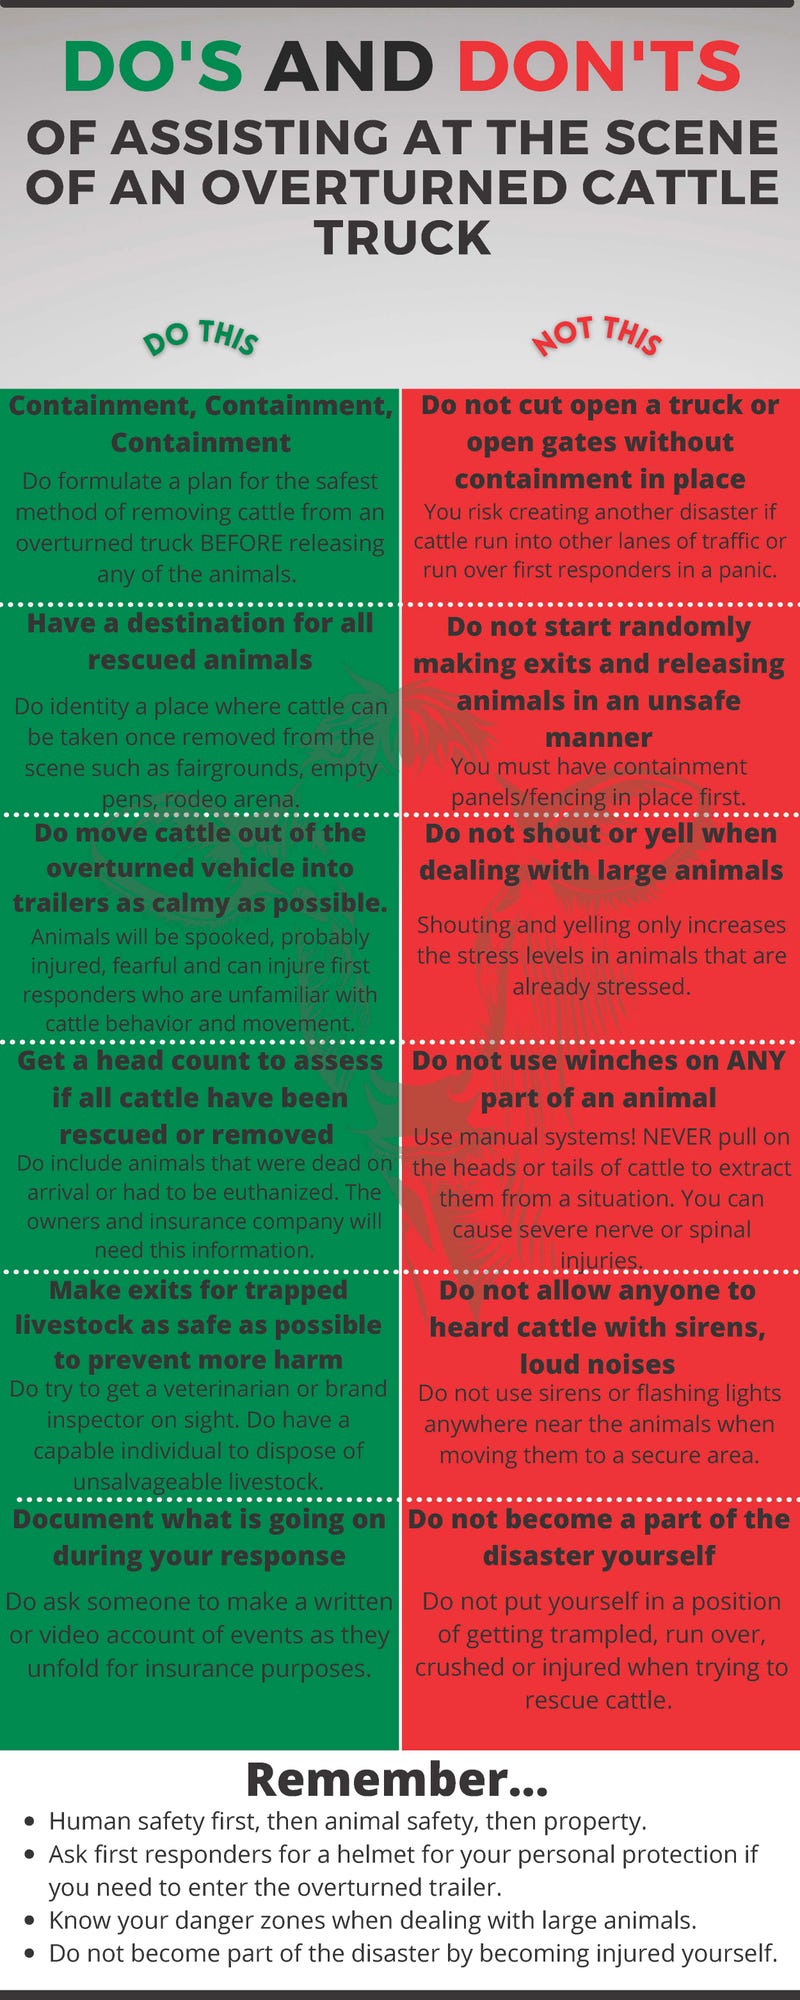 Do's and Don'ts (800 x 2000 px) Infographic Beef Magazine.jpg